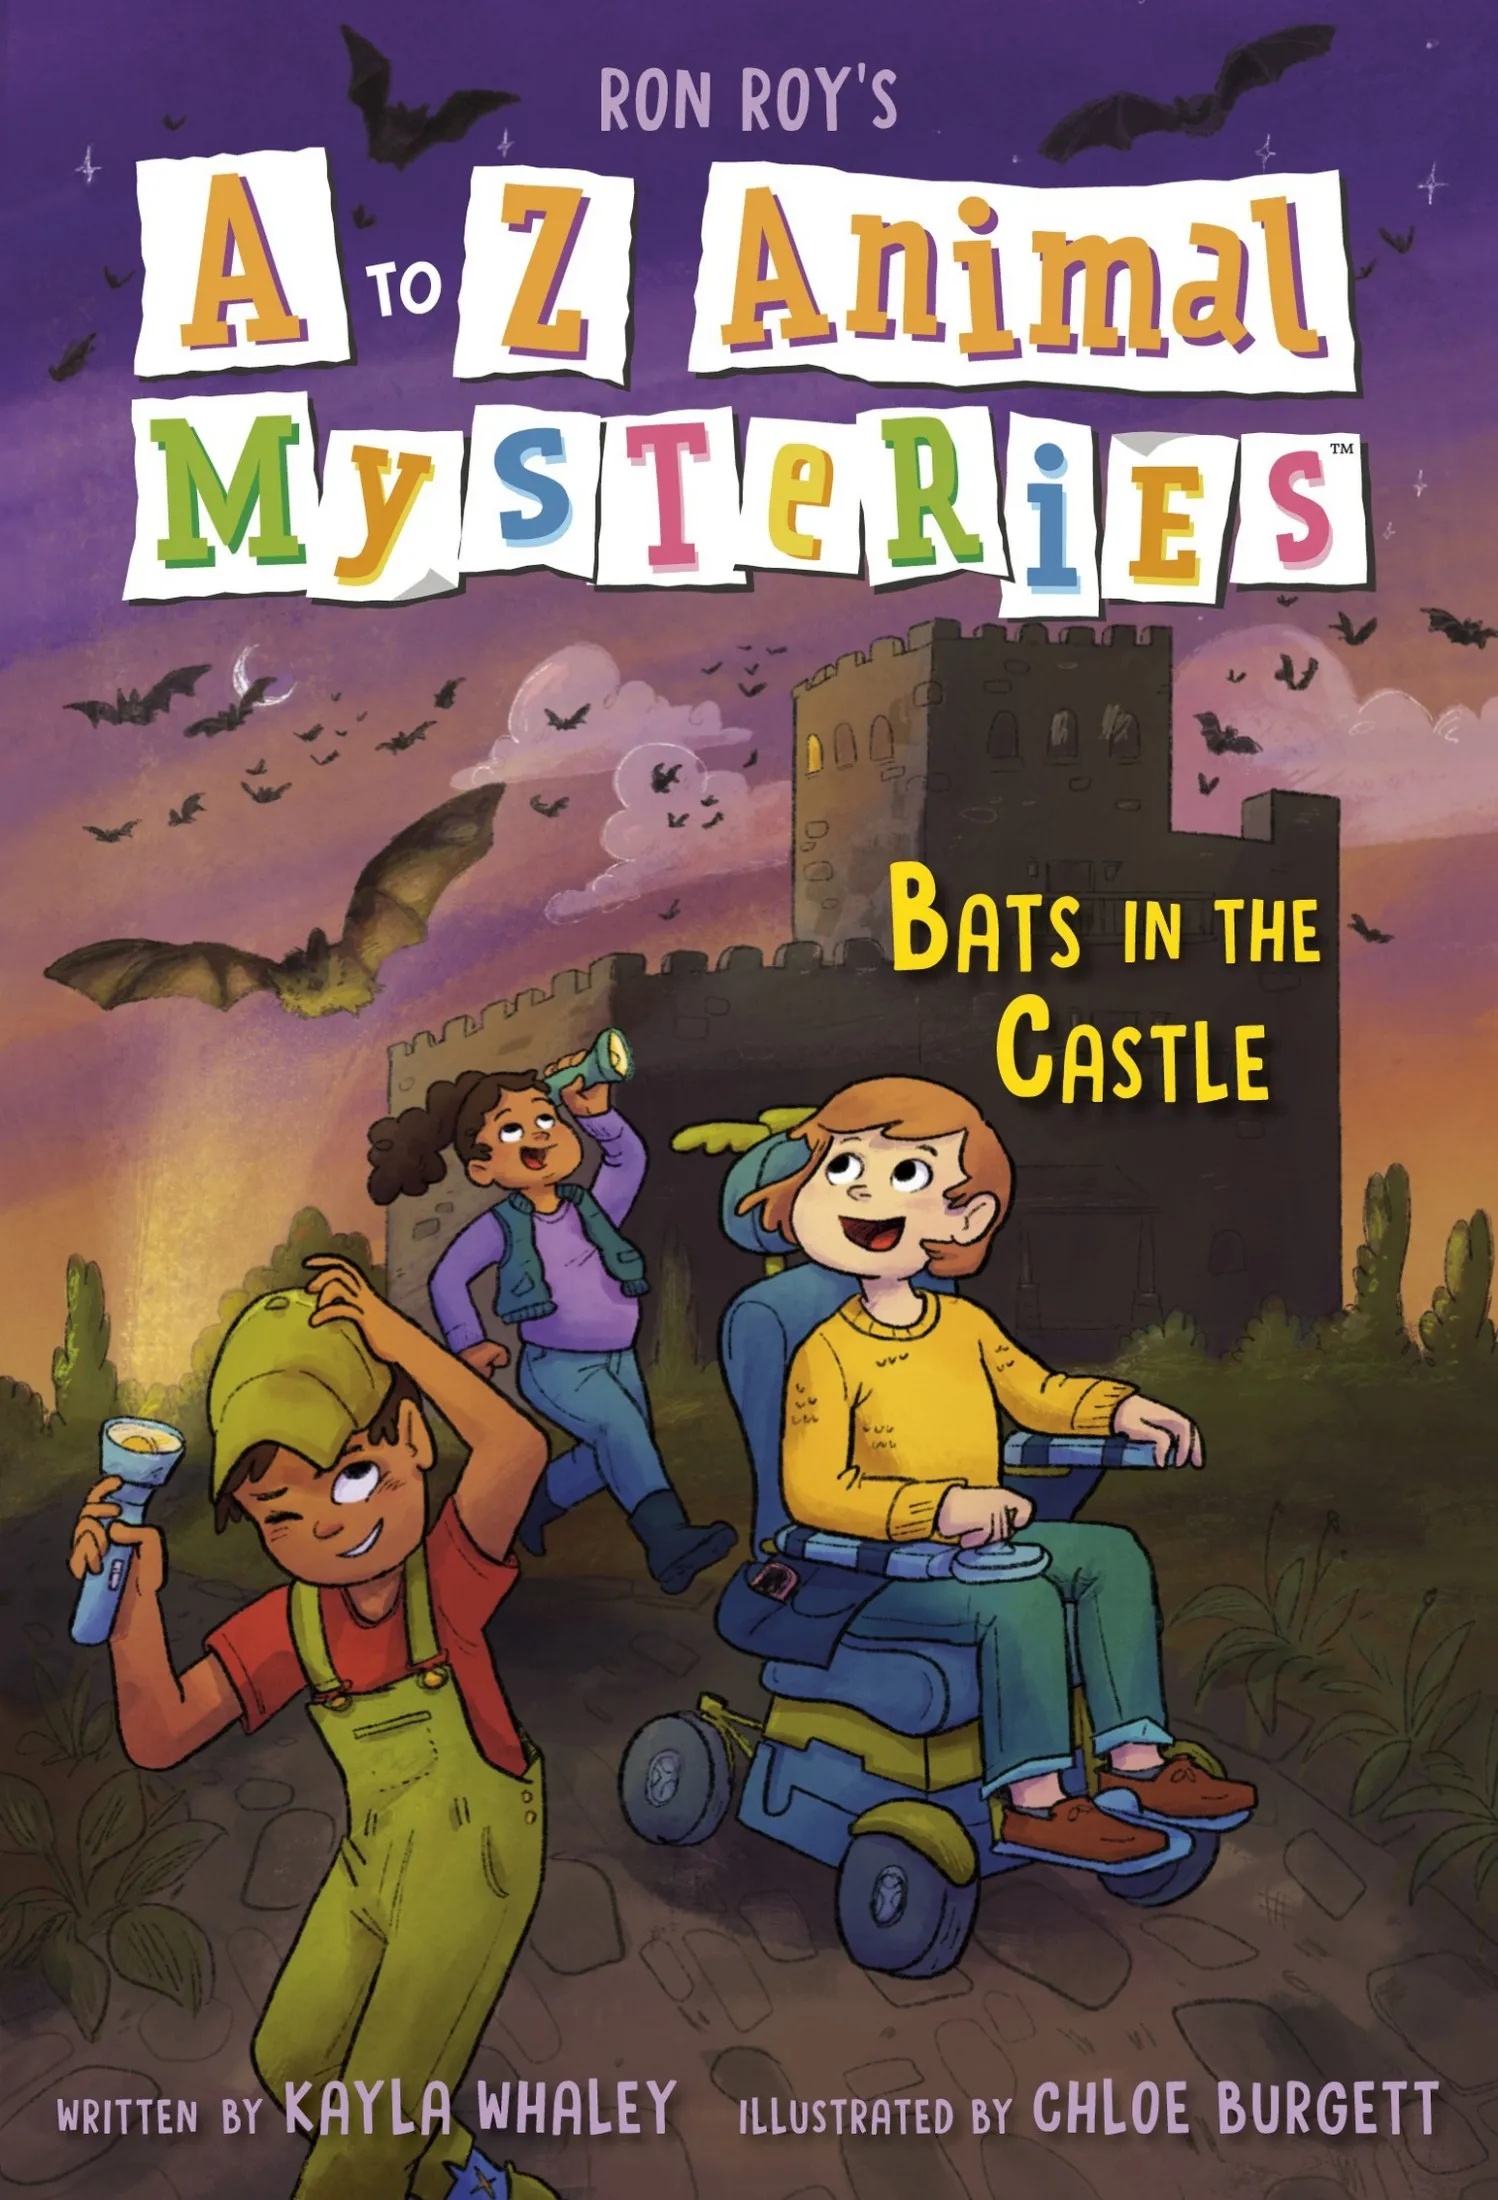 Bats in the Castle (A to Z Animal Mysteries #2)